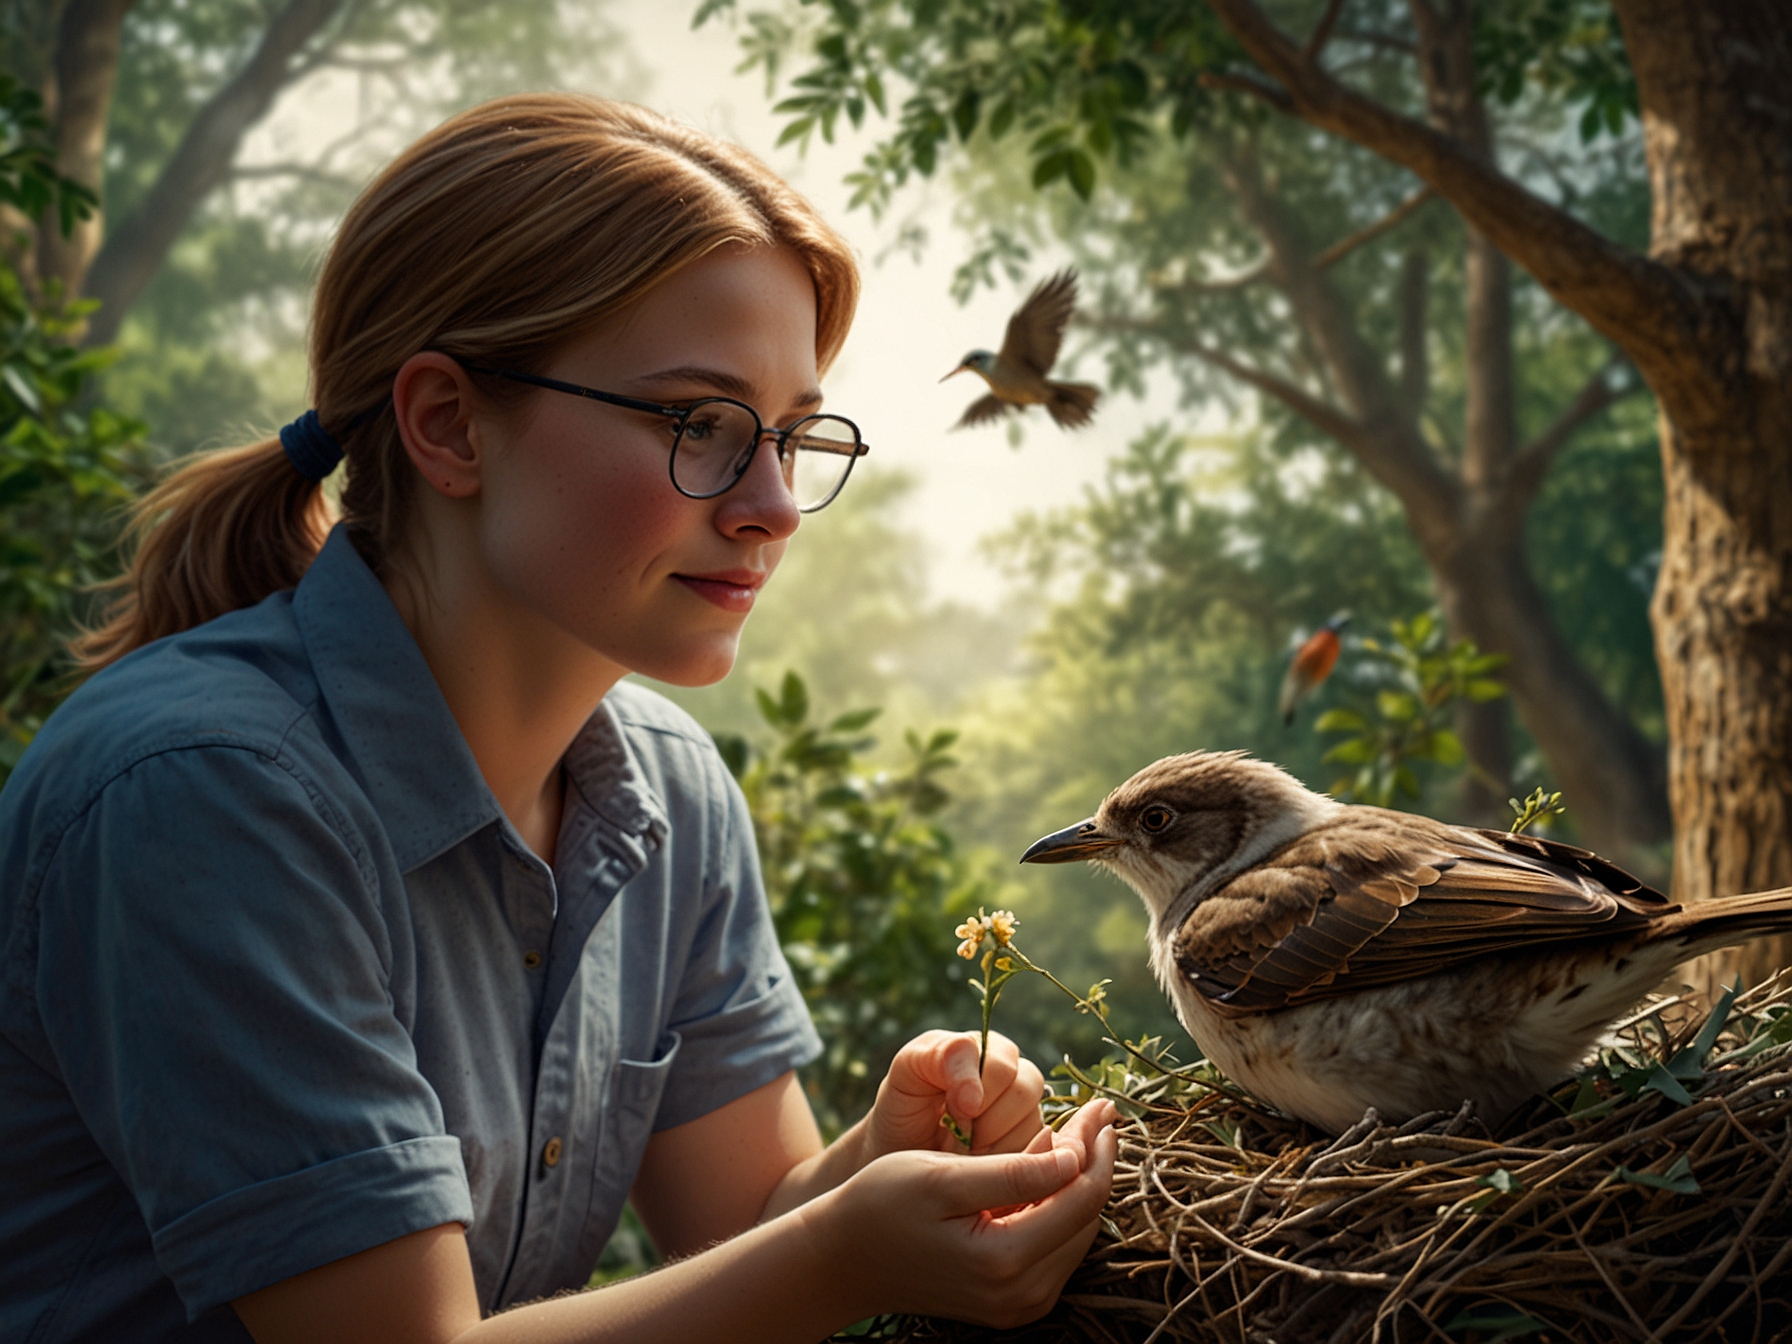 An image showcasing Tom and Emma observing the nestlings up close, accompanied by detailed illustrations of the phoebe birds' nesting habits and surrounding flora, blending education with visual storytelling.